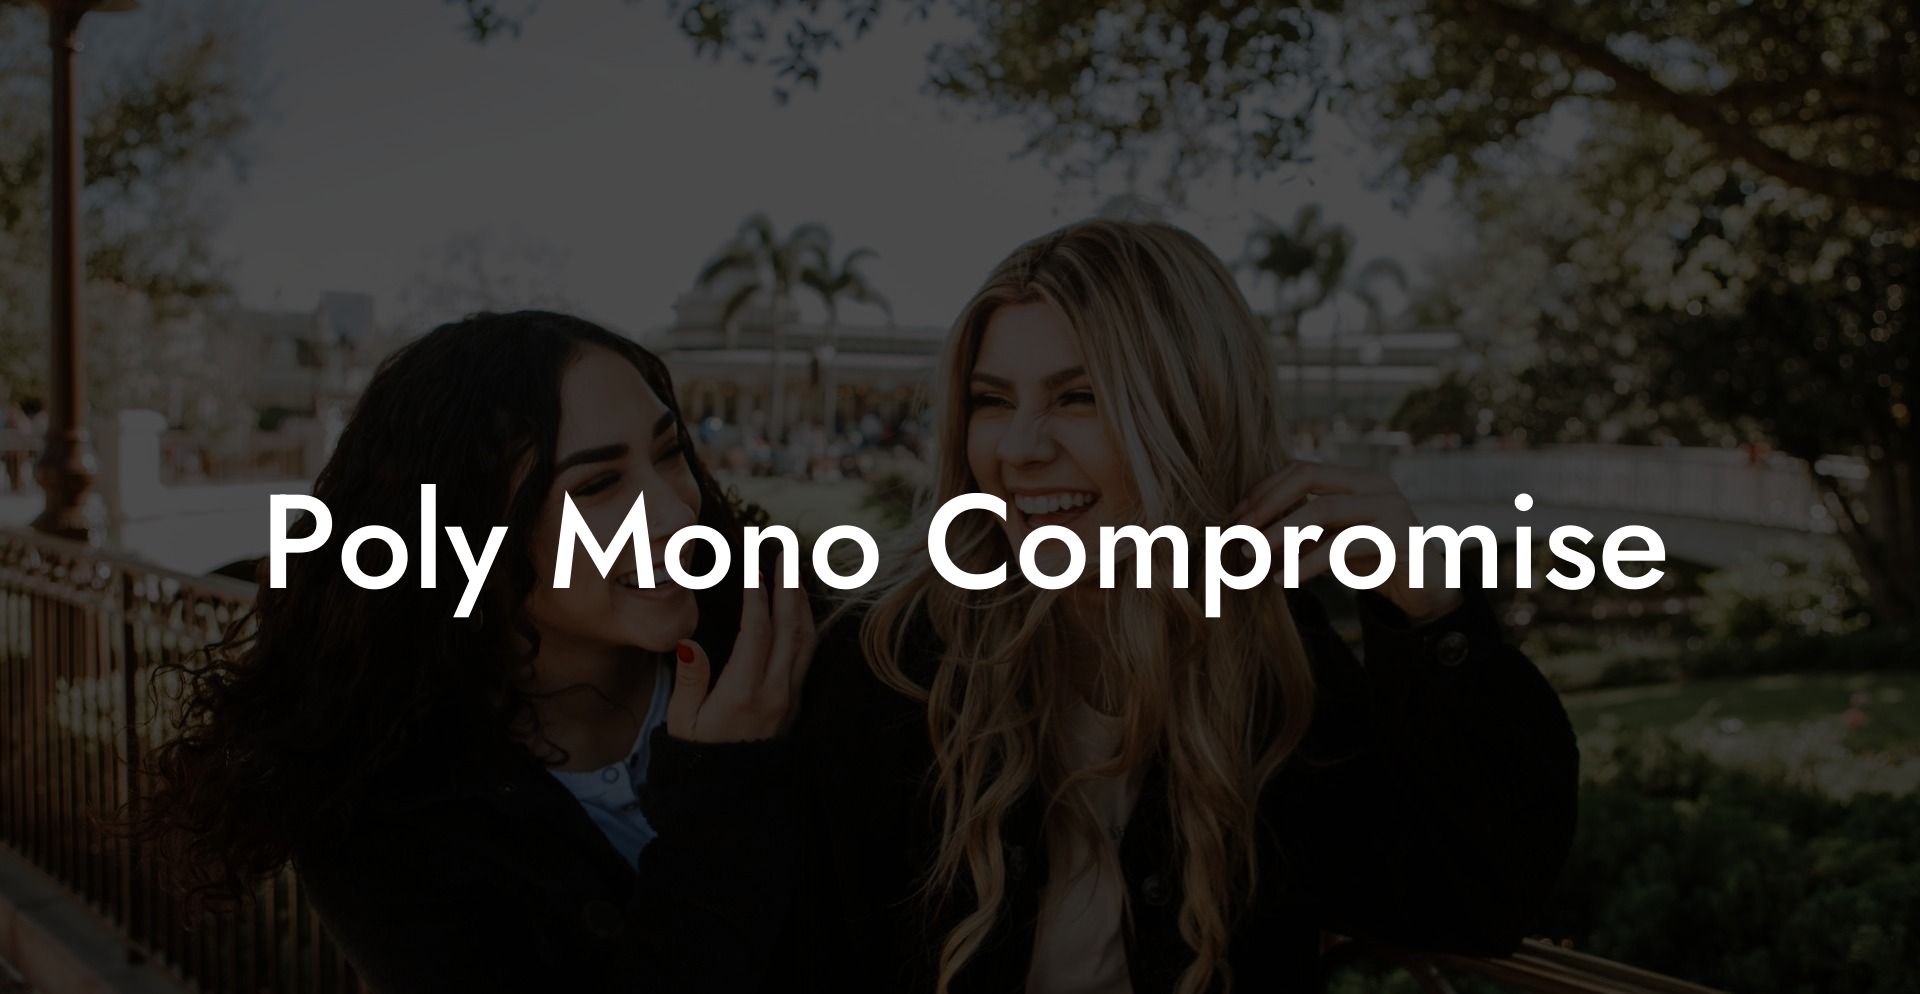 Poly Mono Compromise